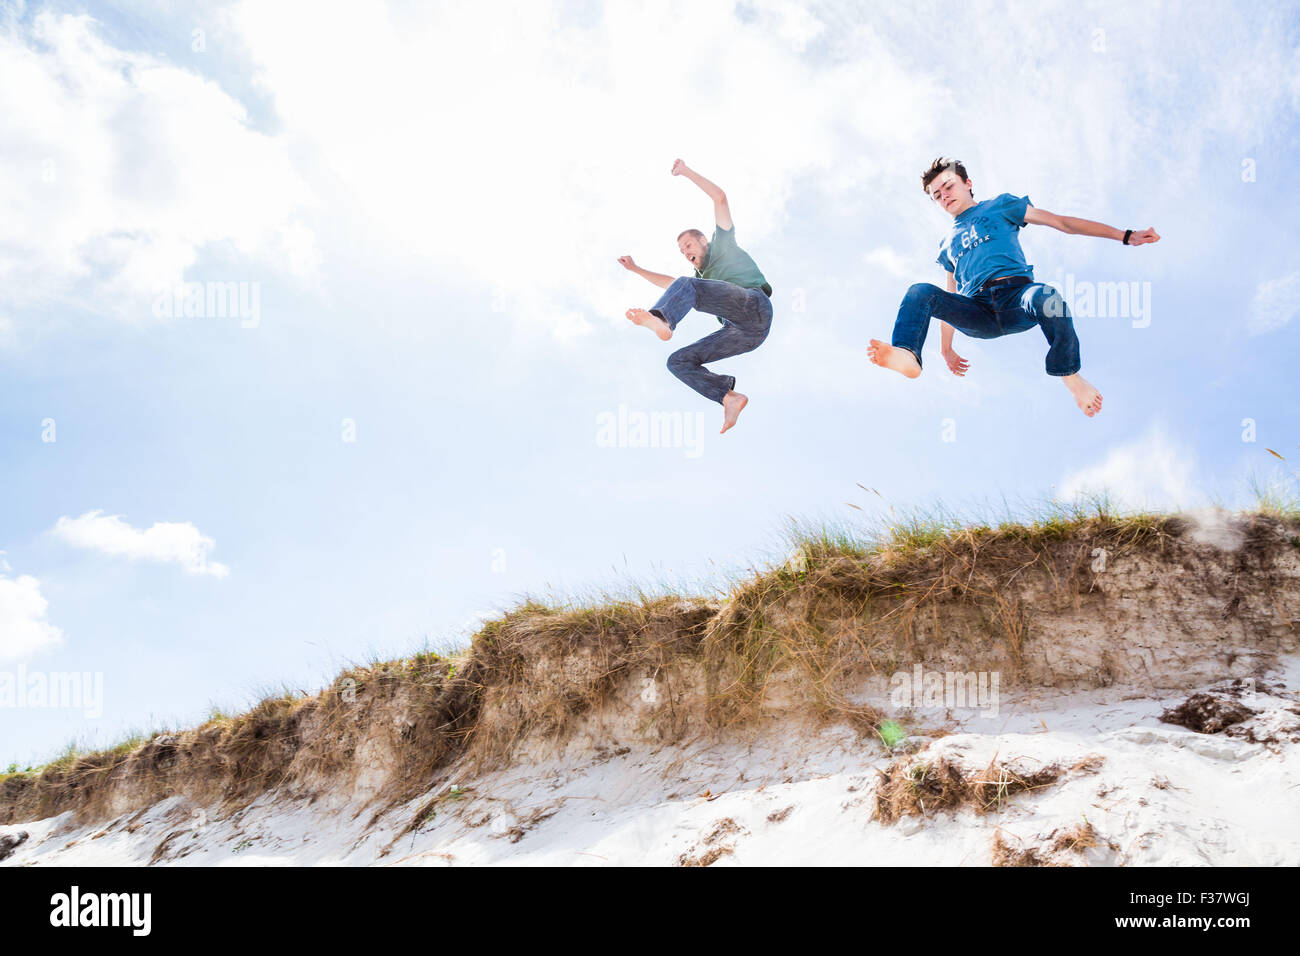 Jump in the dunes. Stock Photo